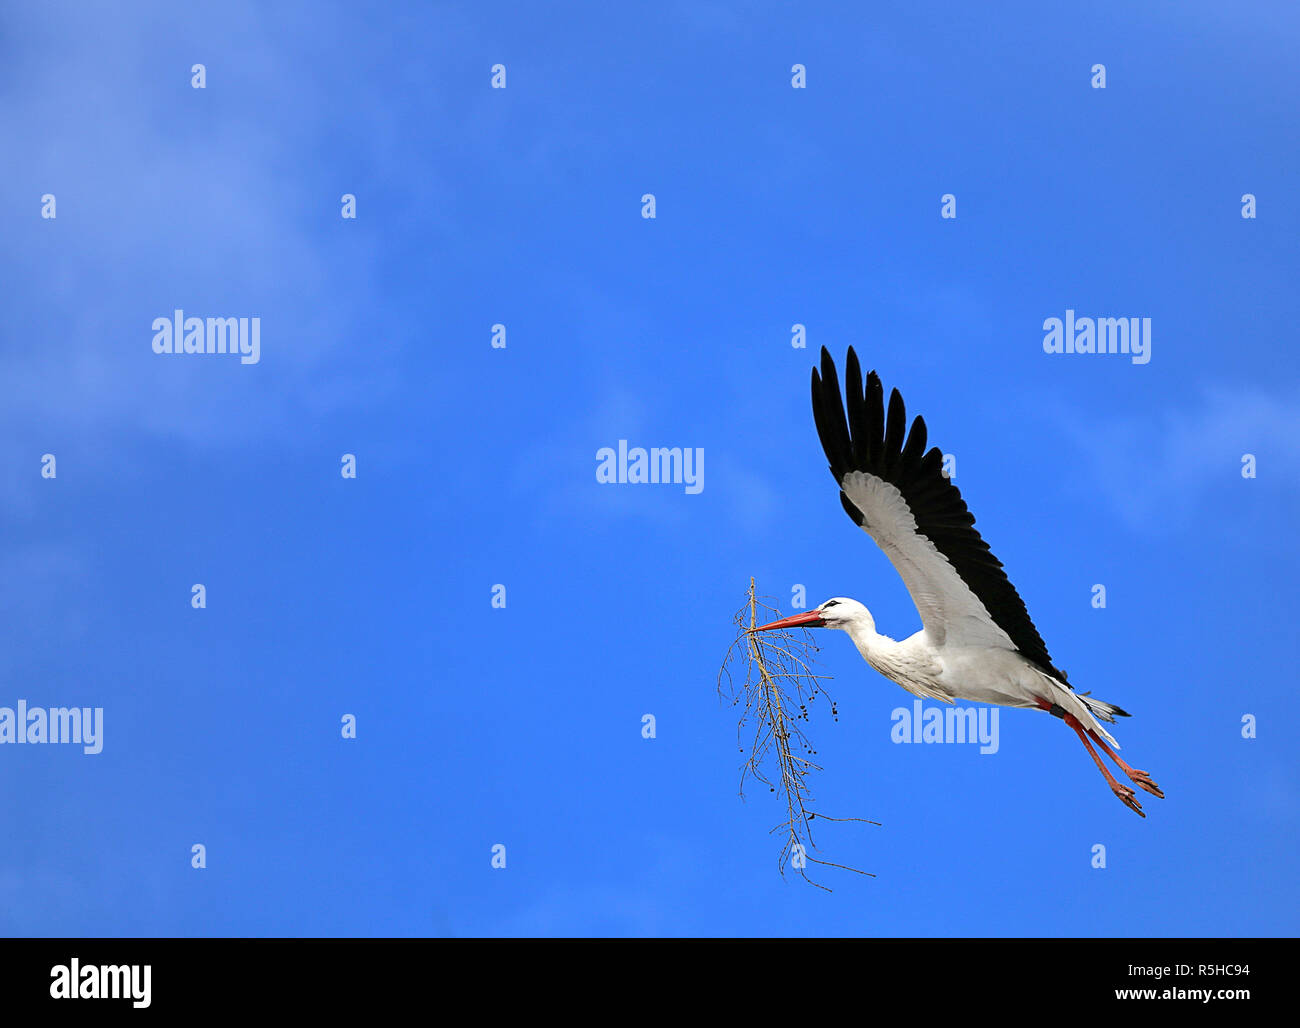 stork in flight with nesting material in front of blue sky Stock Photo